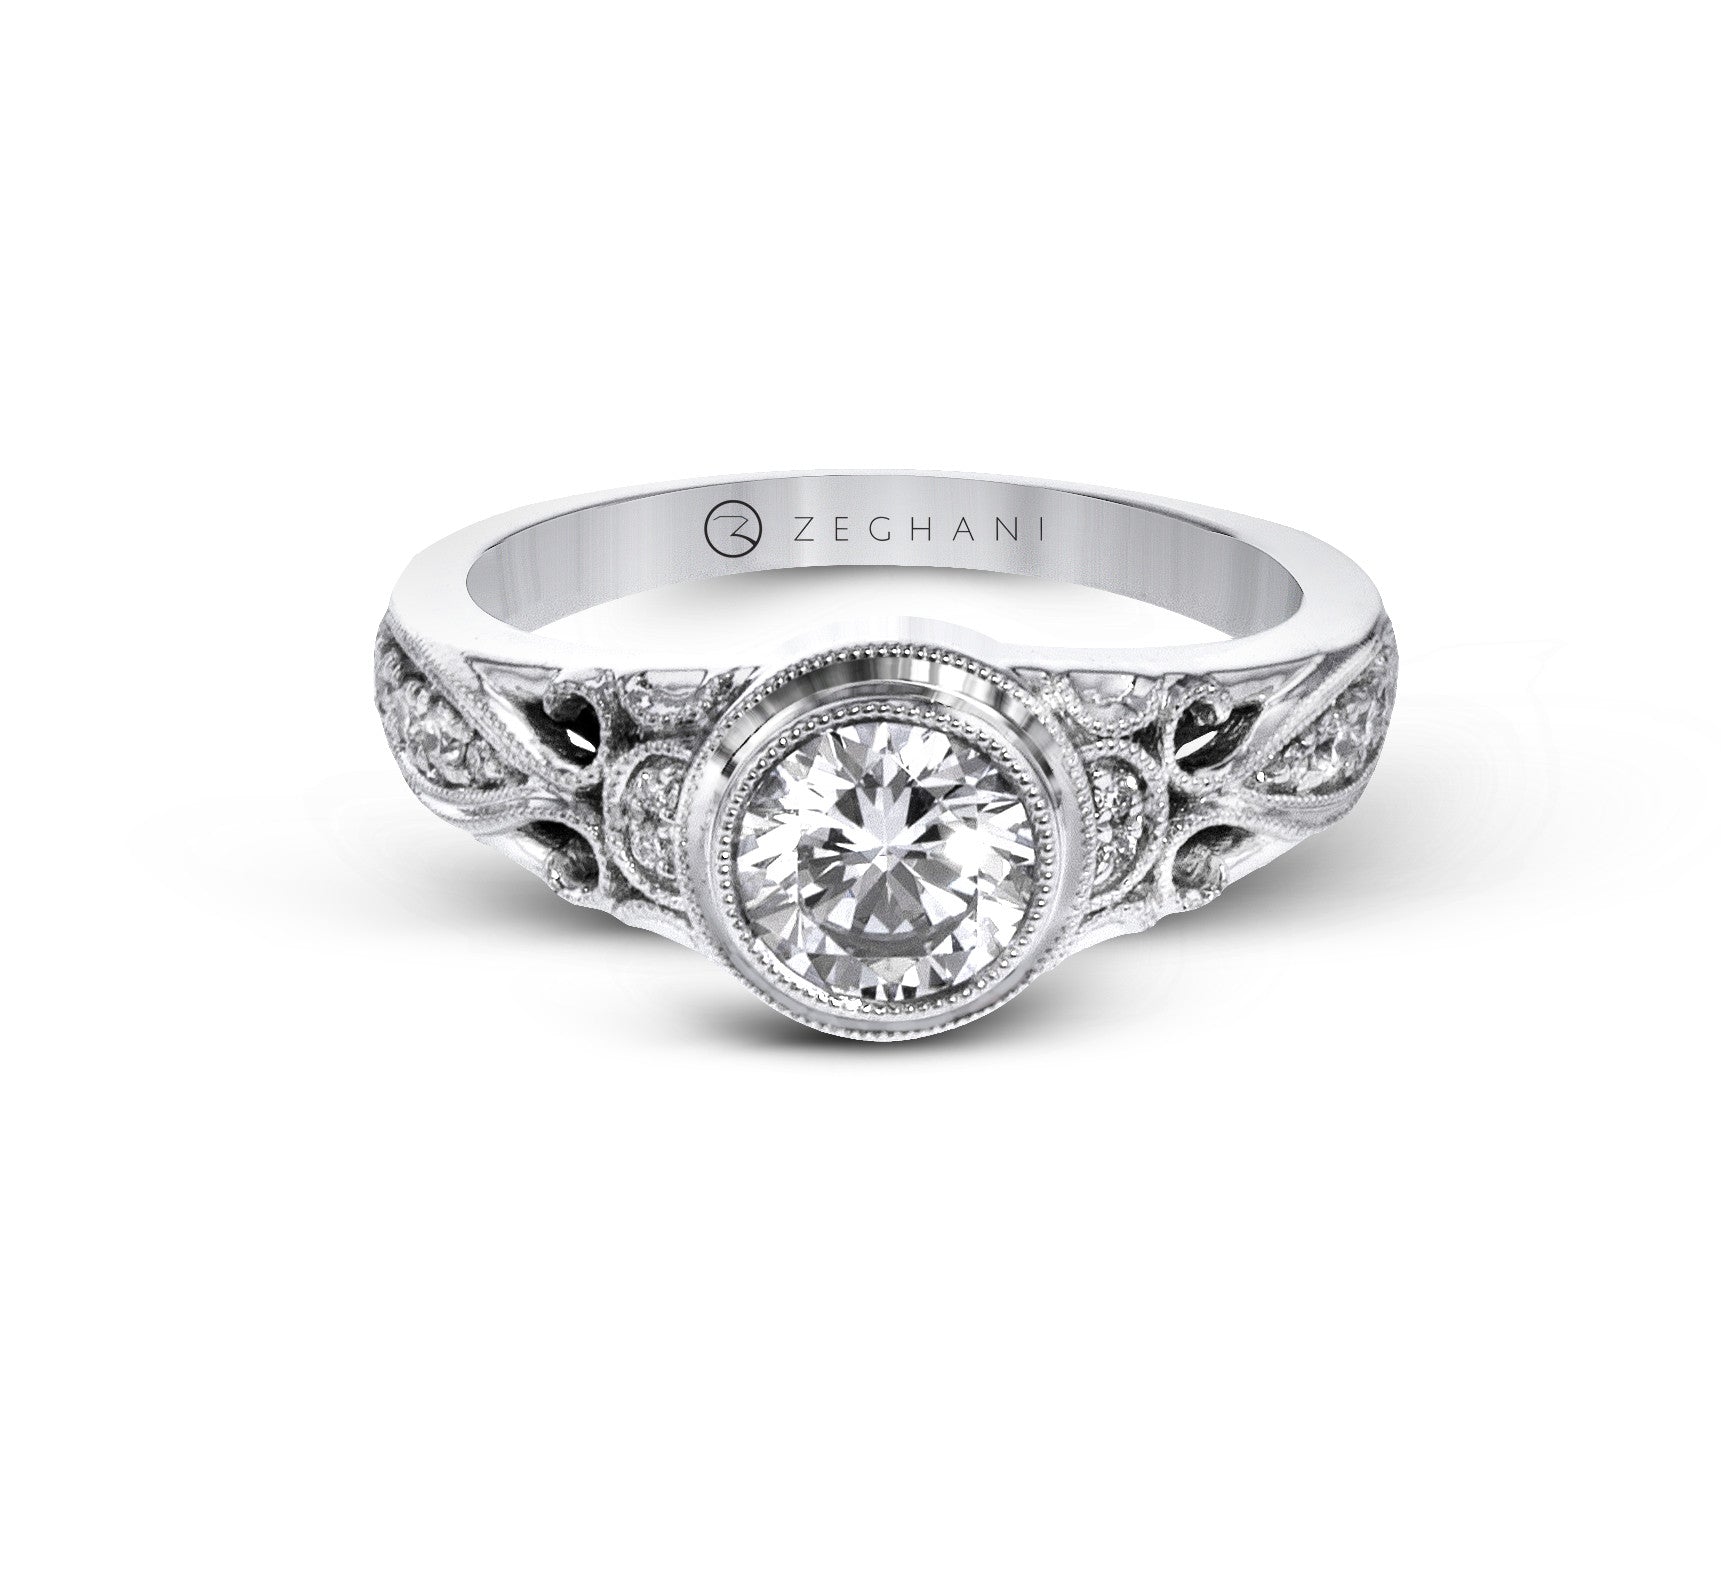 White Gold Pave and Filigree Engagement Ring Mounting from Zeghani by Simon G